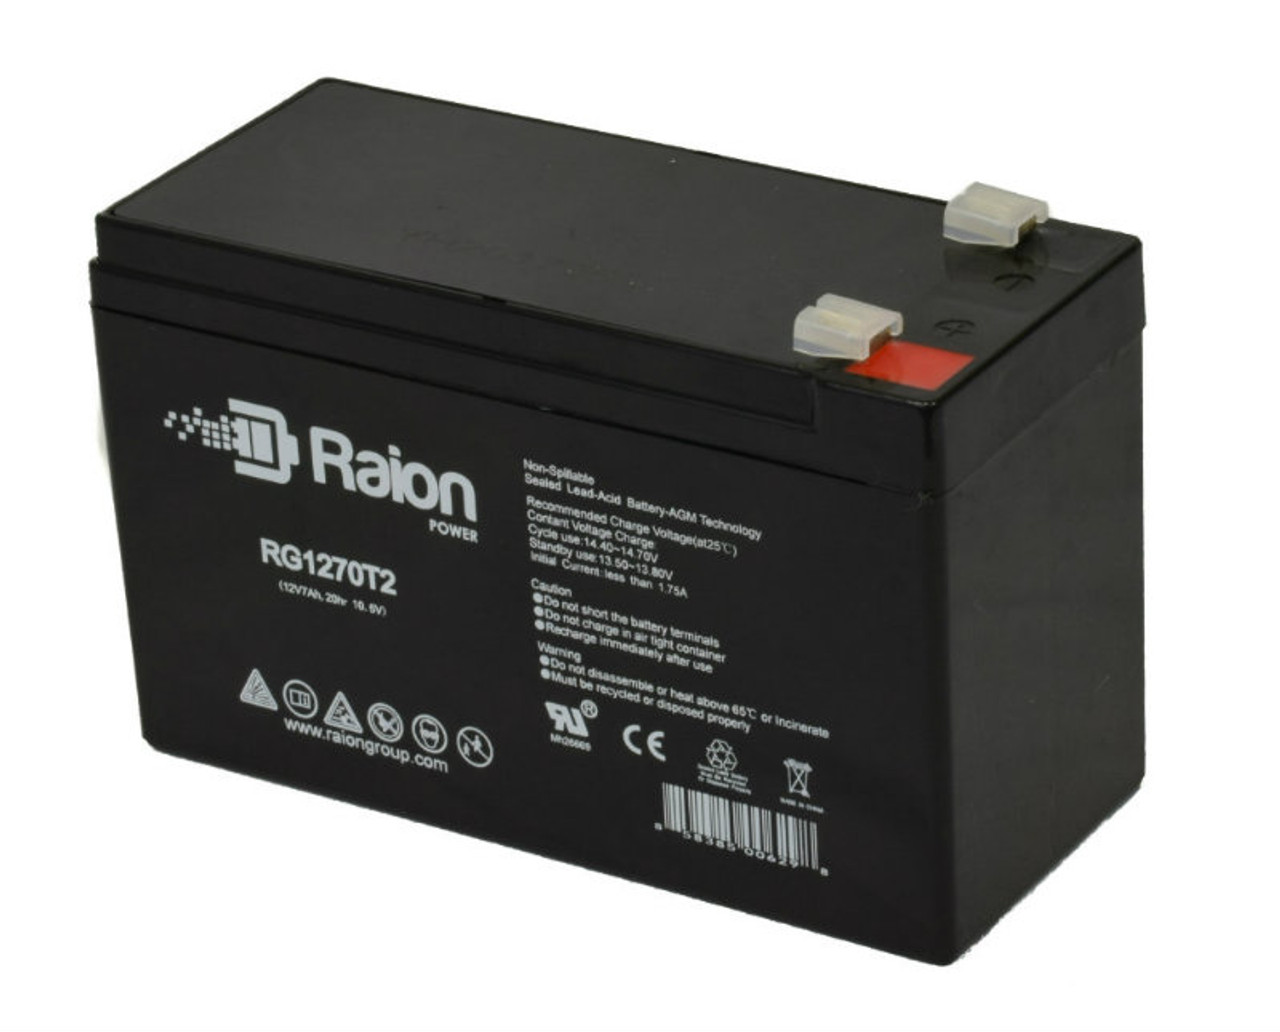 Raion Power Replacement 12V 7Ah RG1270T1 Fire Alarm Battery for Altronix AL600ULXR